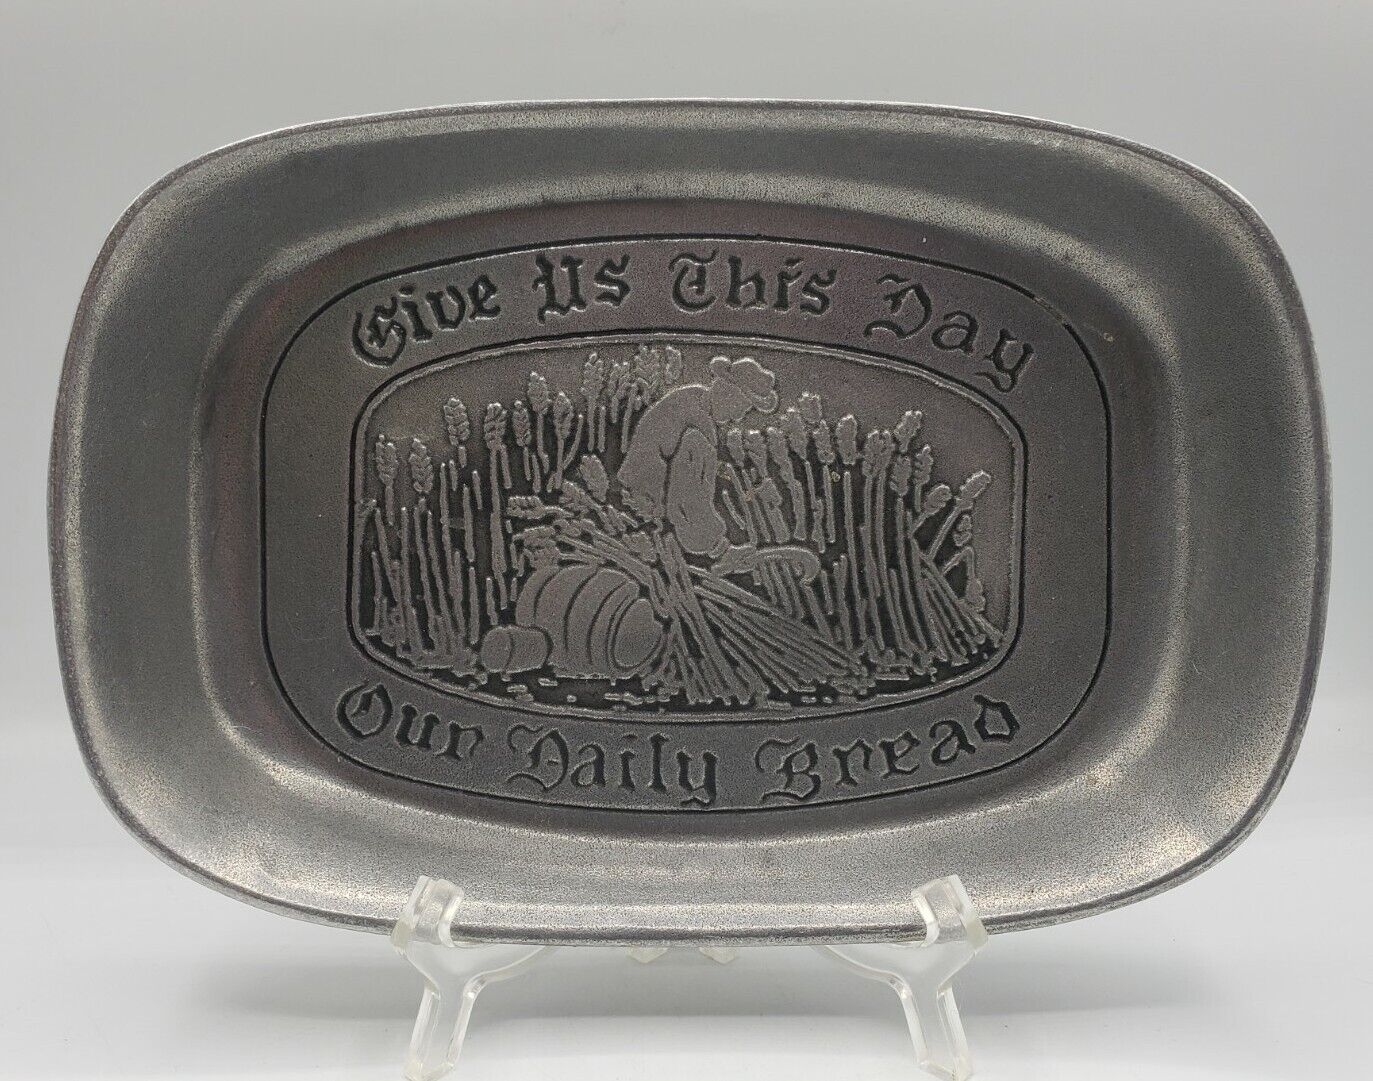 Wilton Armetale Give Us This Day Our Daily Bread Tray Made In USA 9.5\